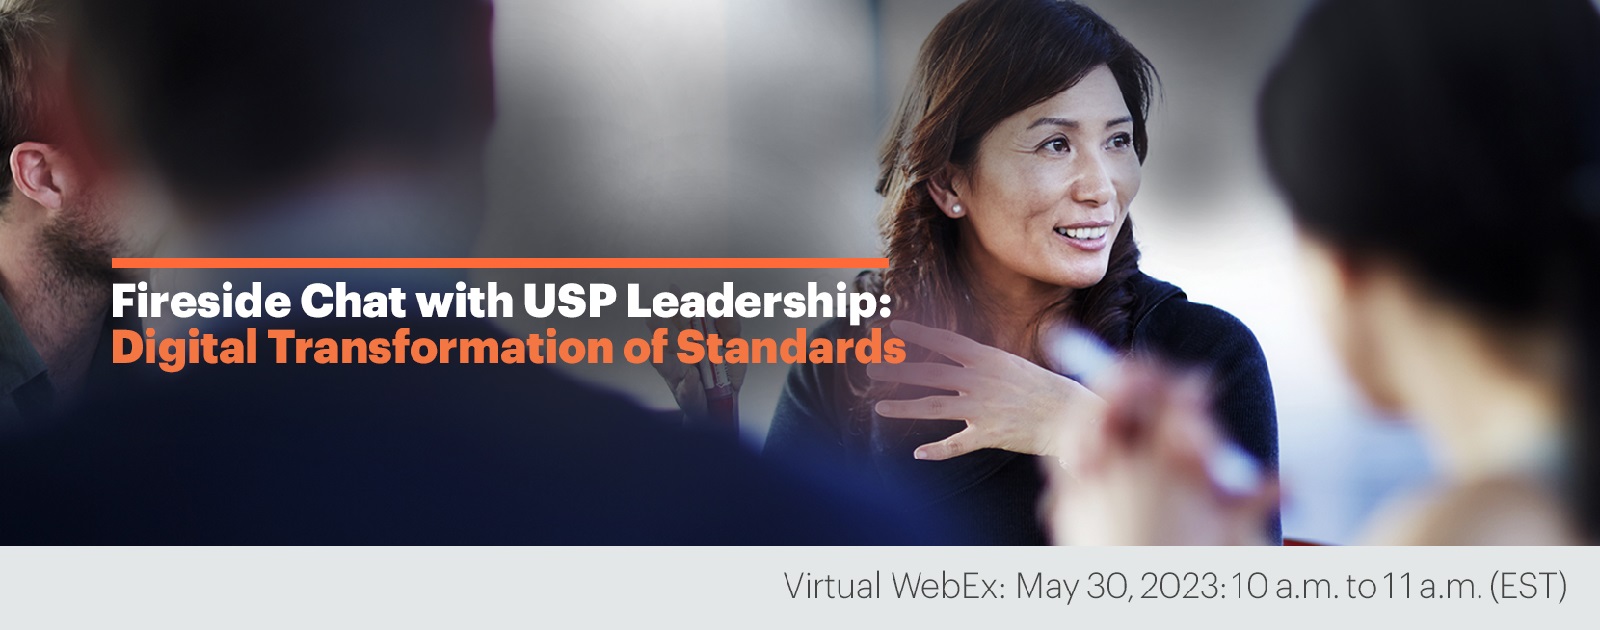 Fireside Chat with USP Leadership